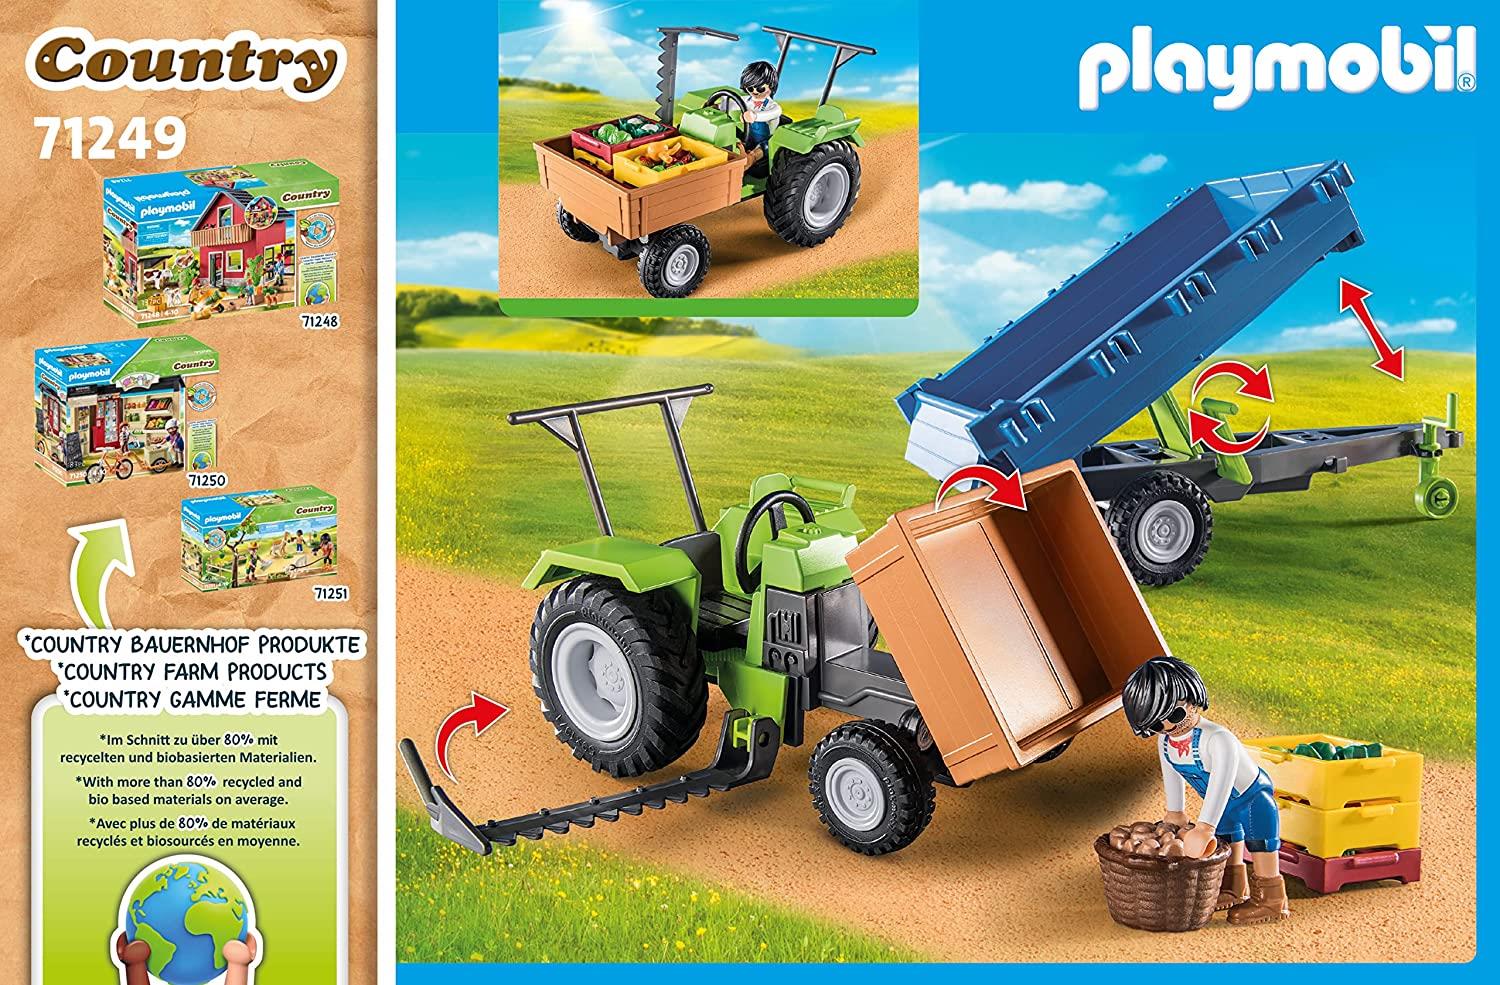 Playmobil Country 71249 Harvester Tractor with Trailer